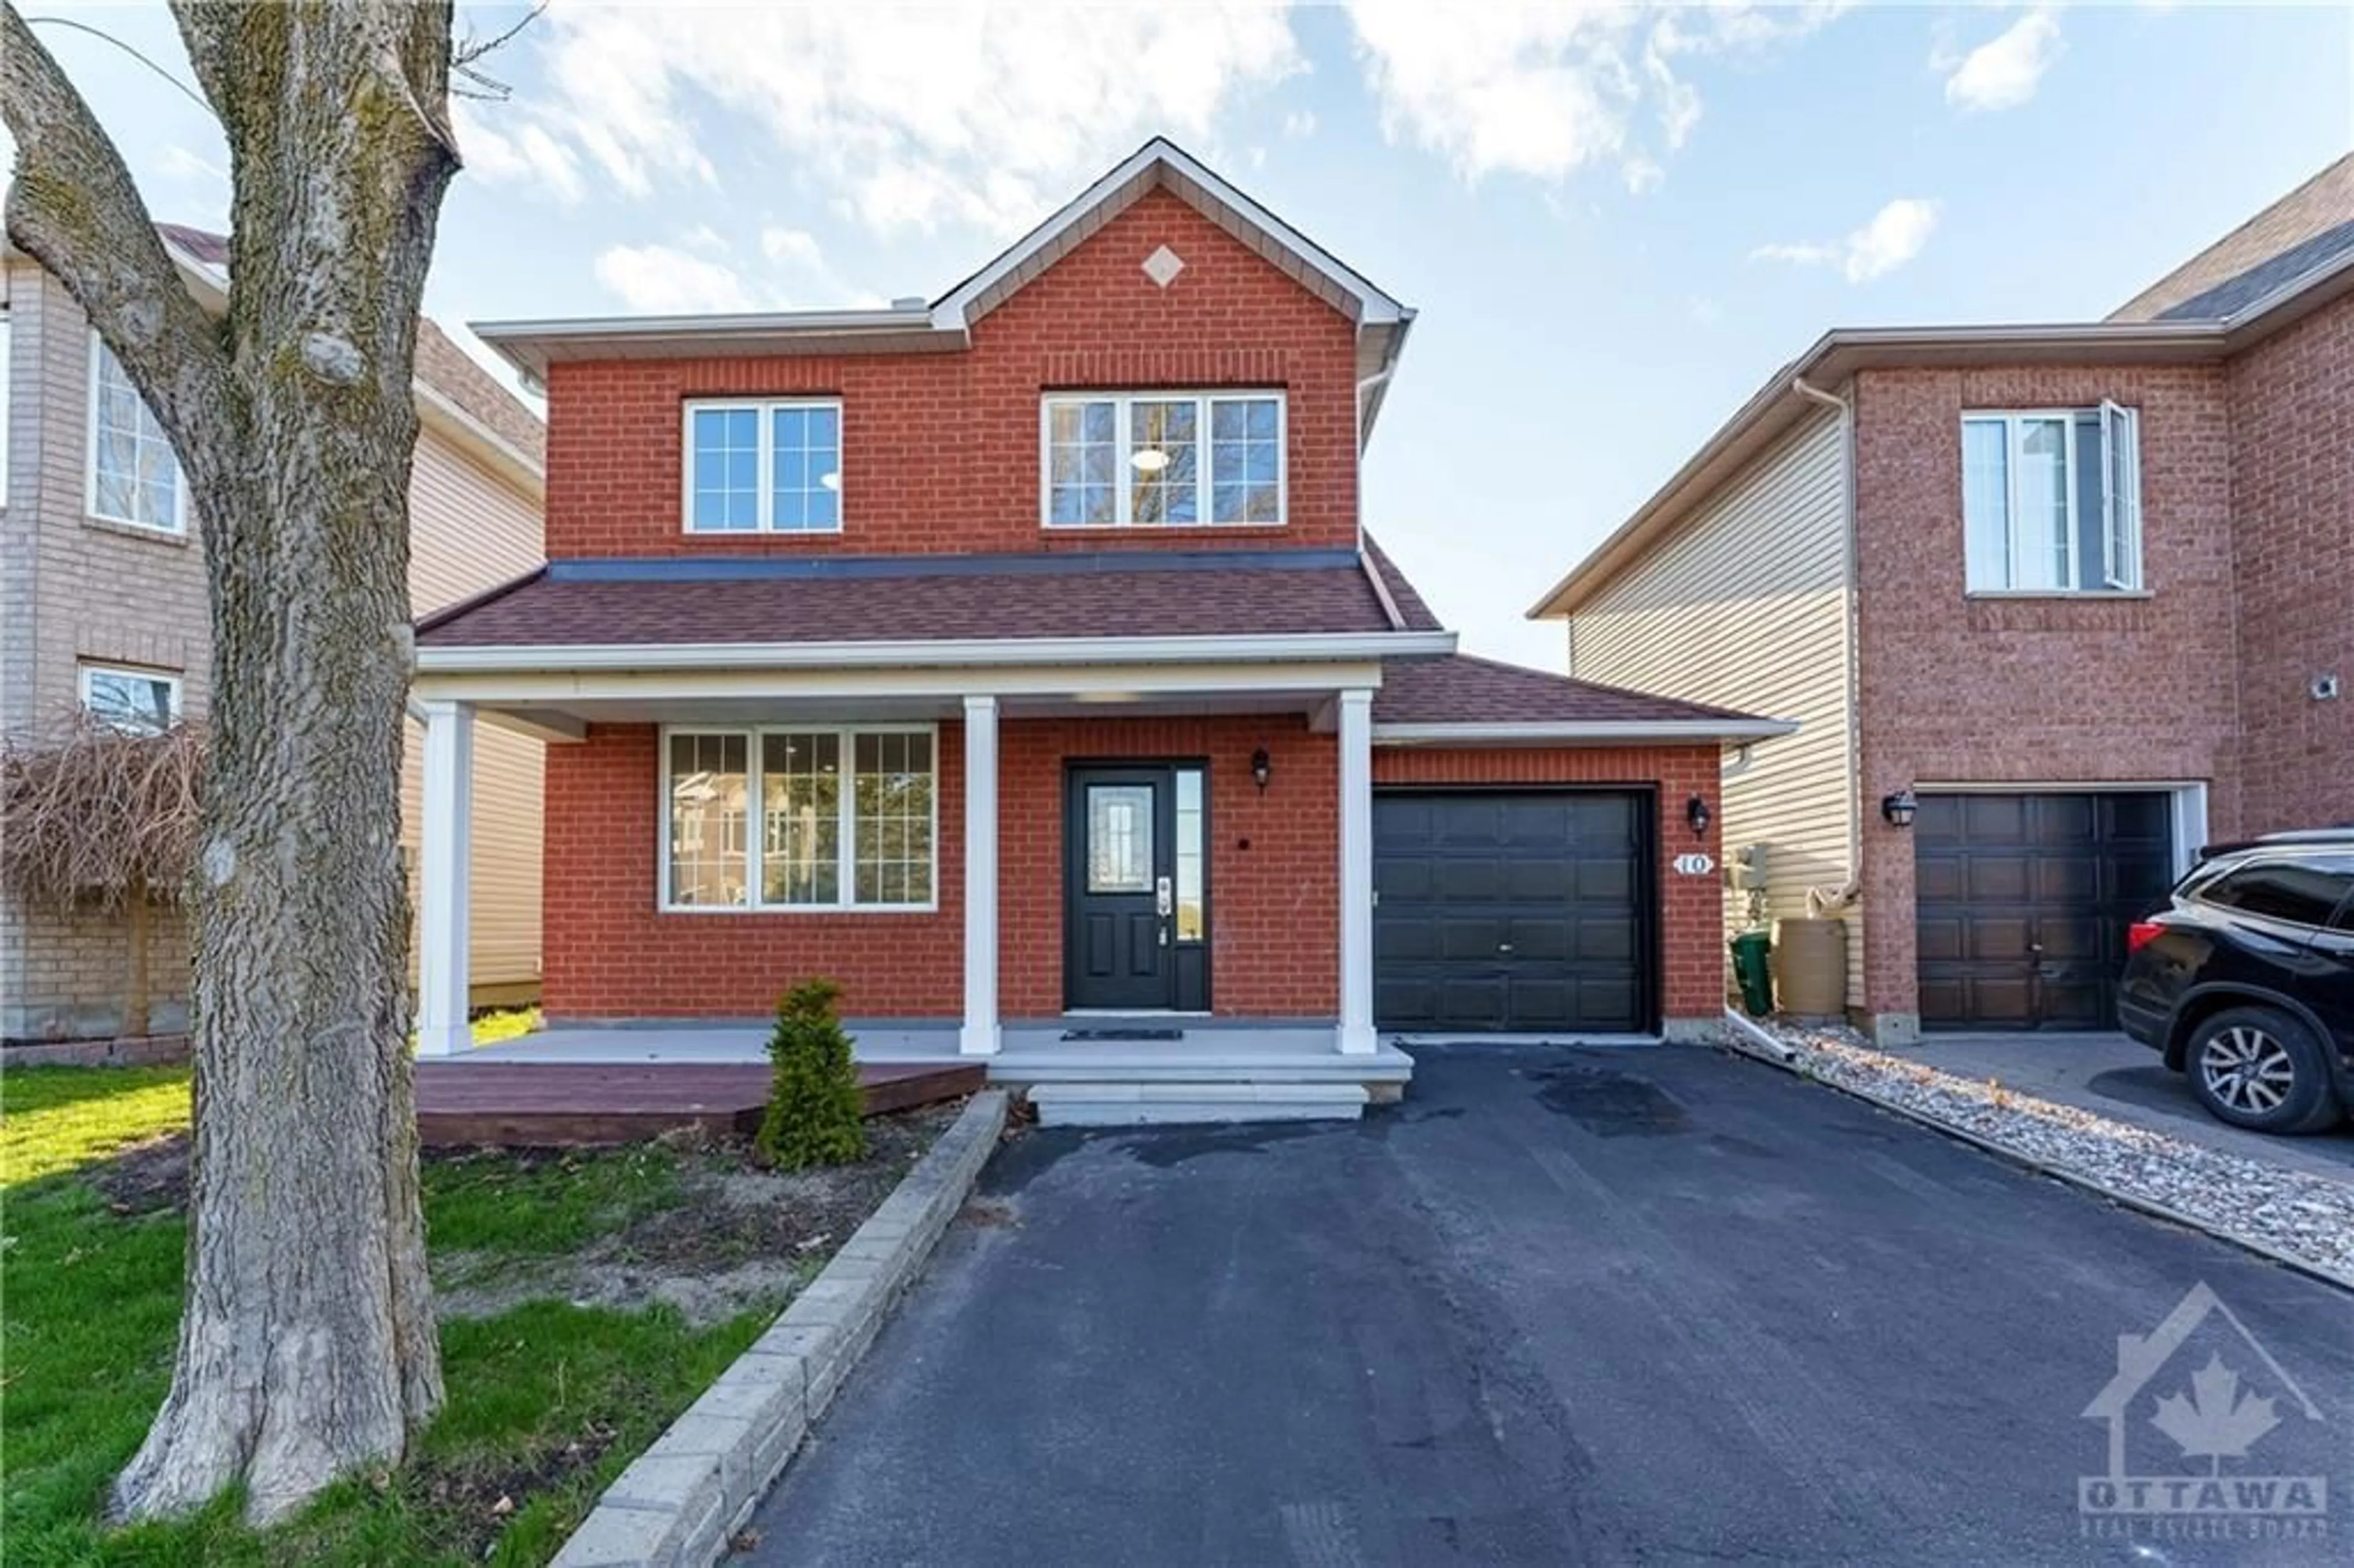 Home with brick exterior material for 10 ROSSAN St, Ottawa Ontario K2G 6R6